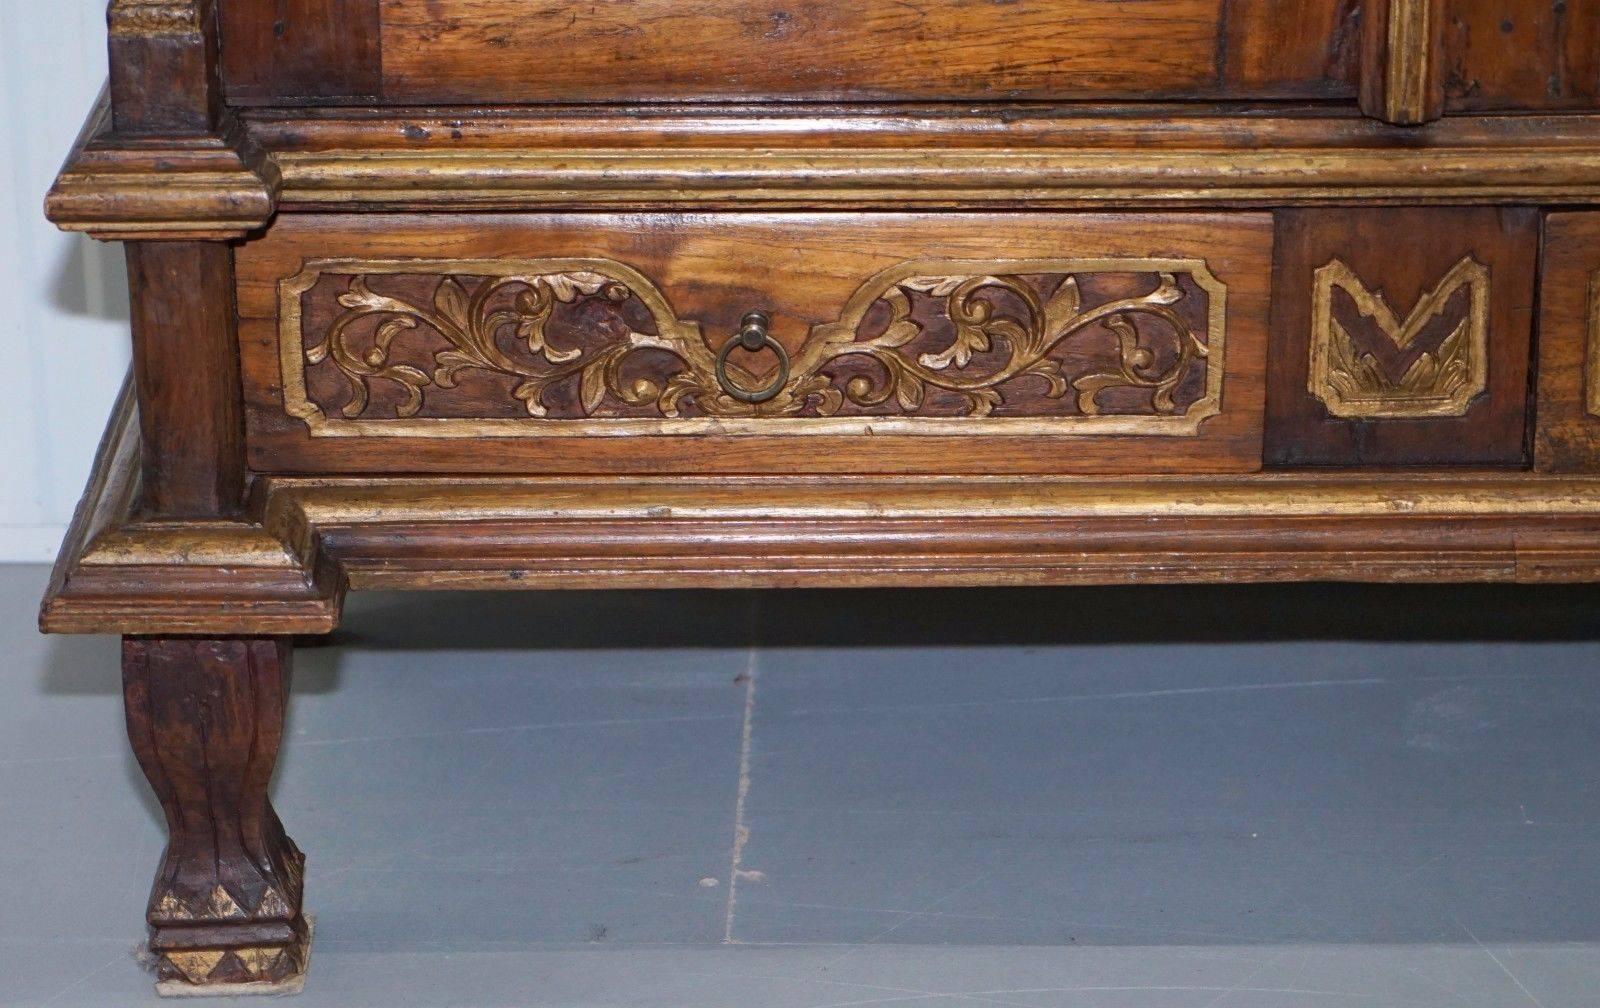 French Provincial Stunning Hand-Carved Antique French Louis 18th-19th Century Bookcase Cabinet